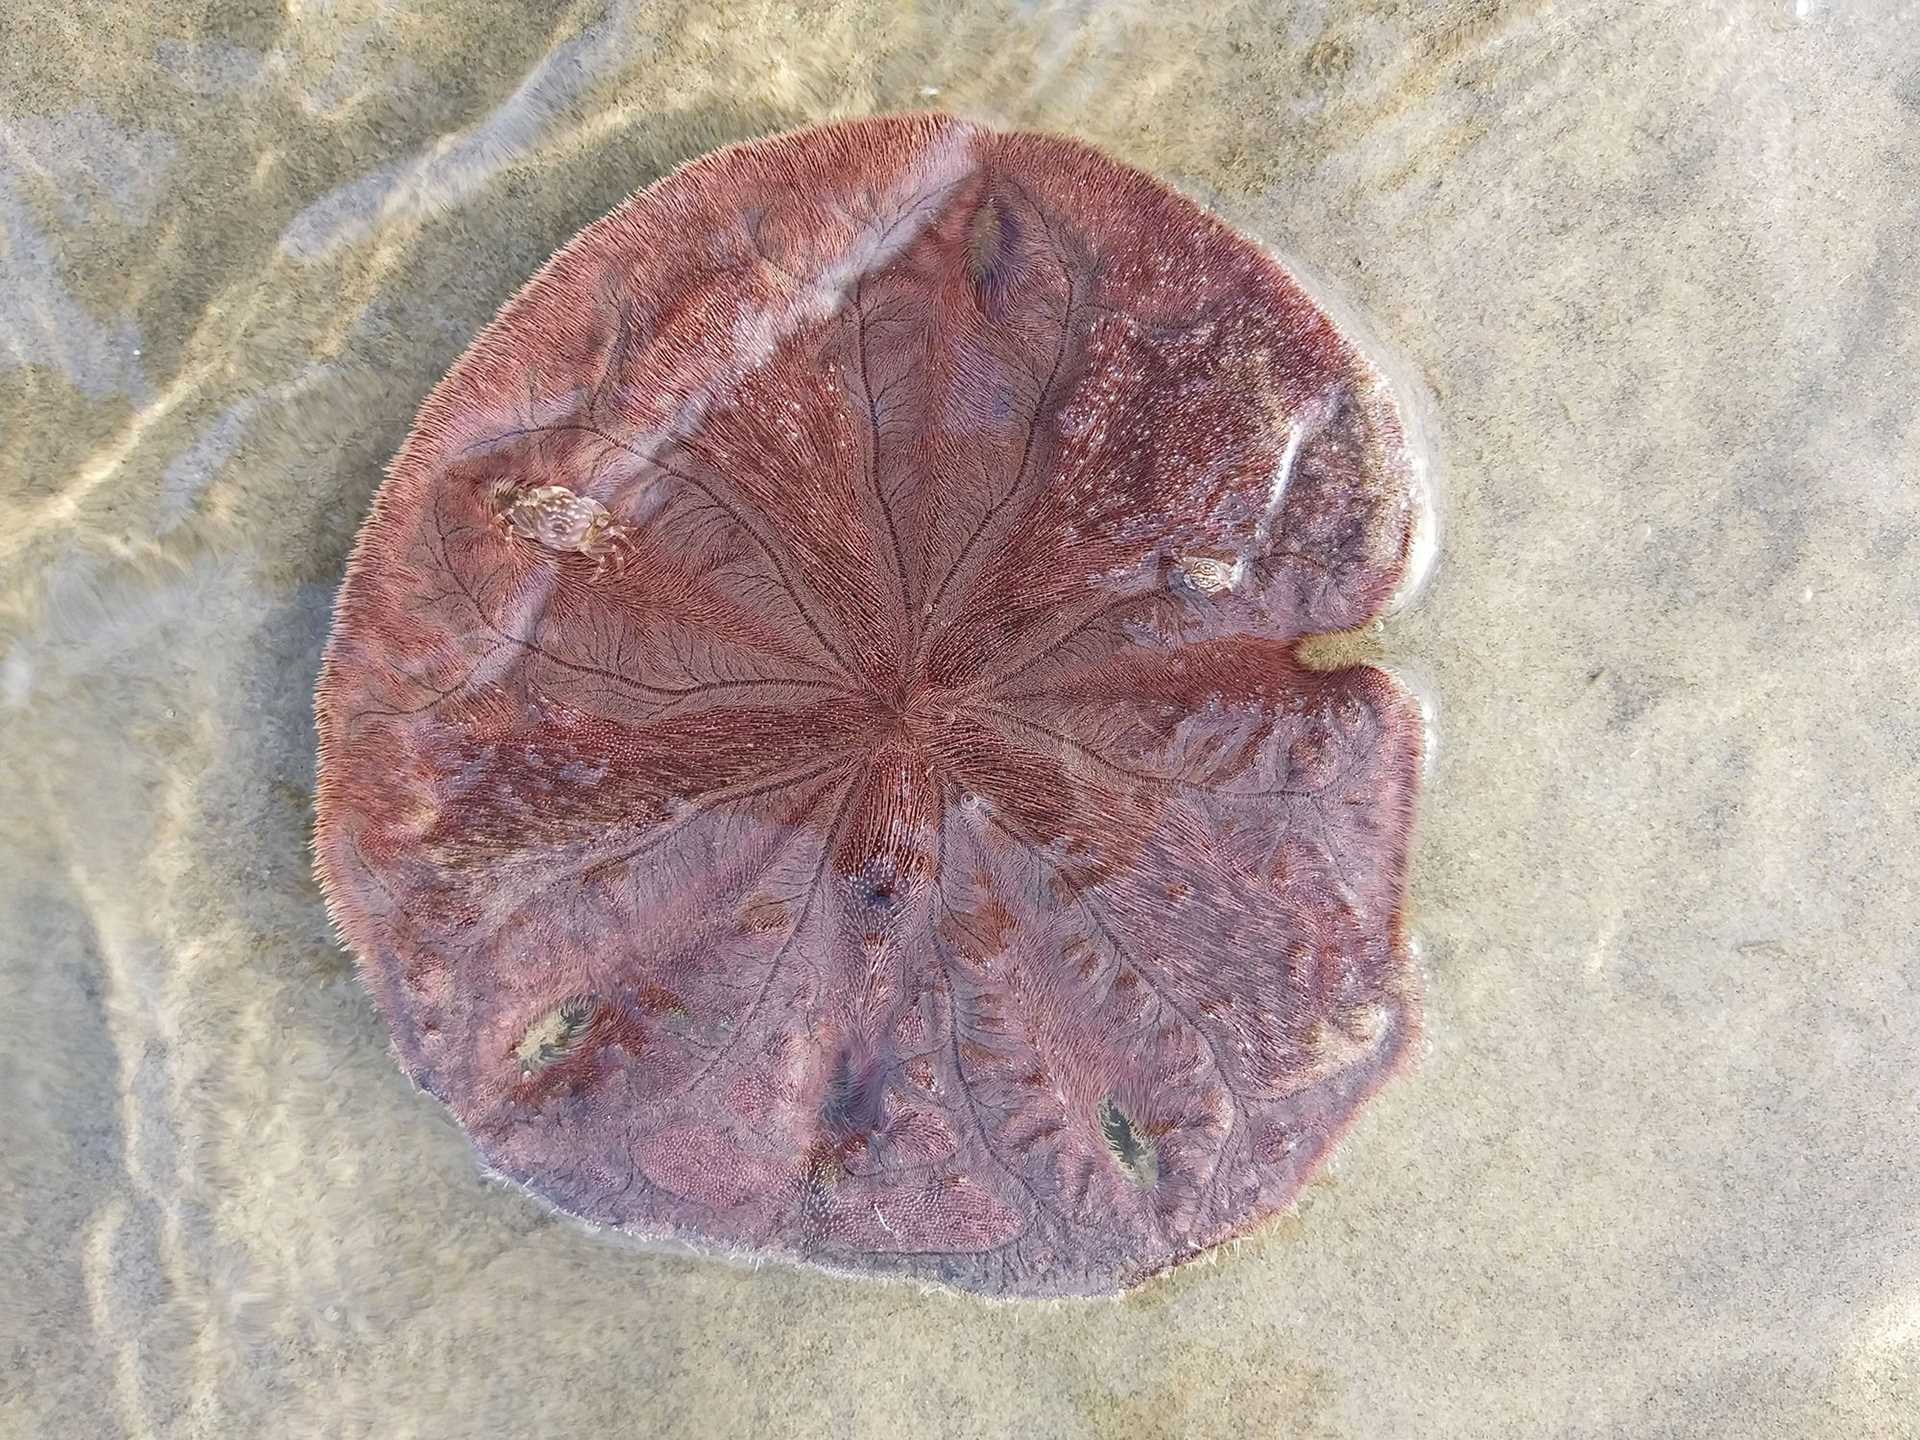 sand dollar with tiny crabs crawling on it